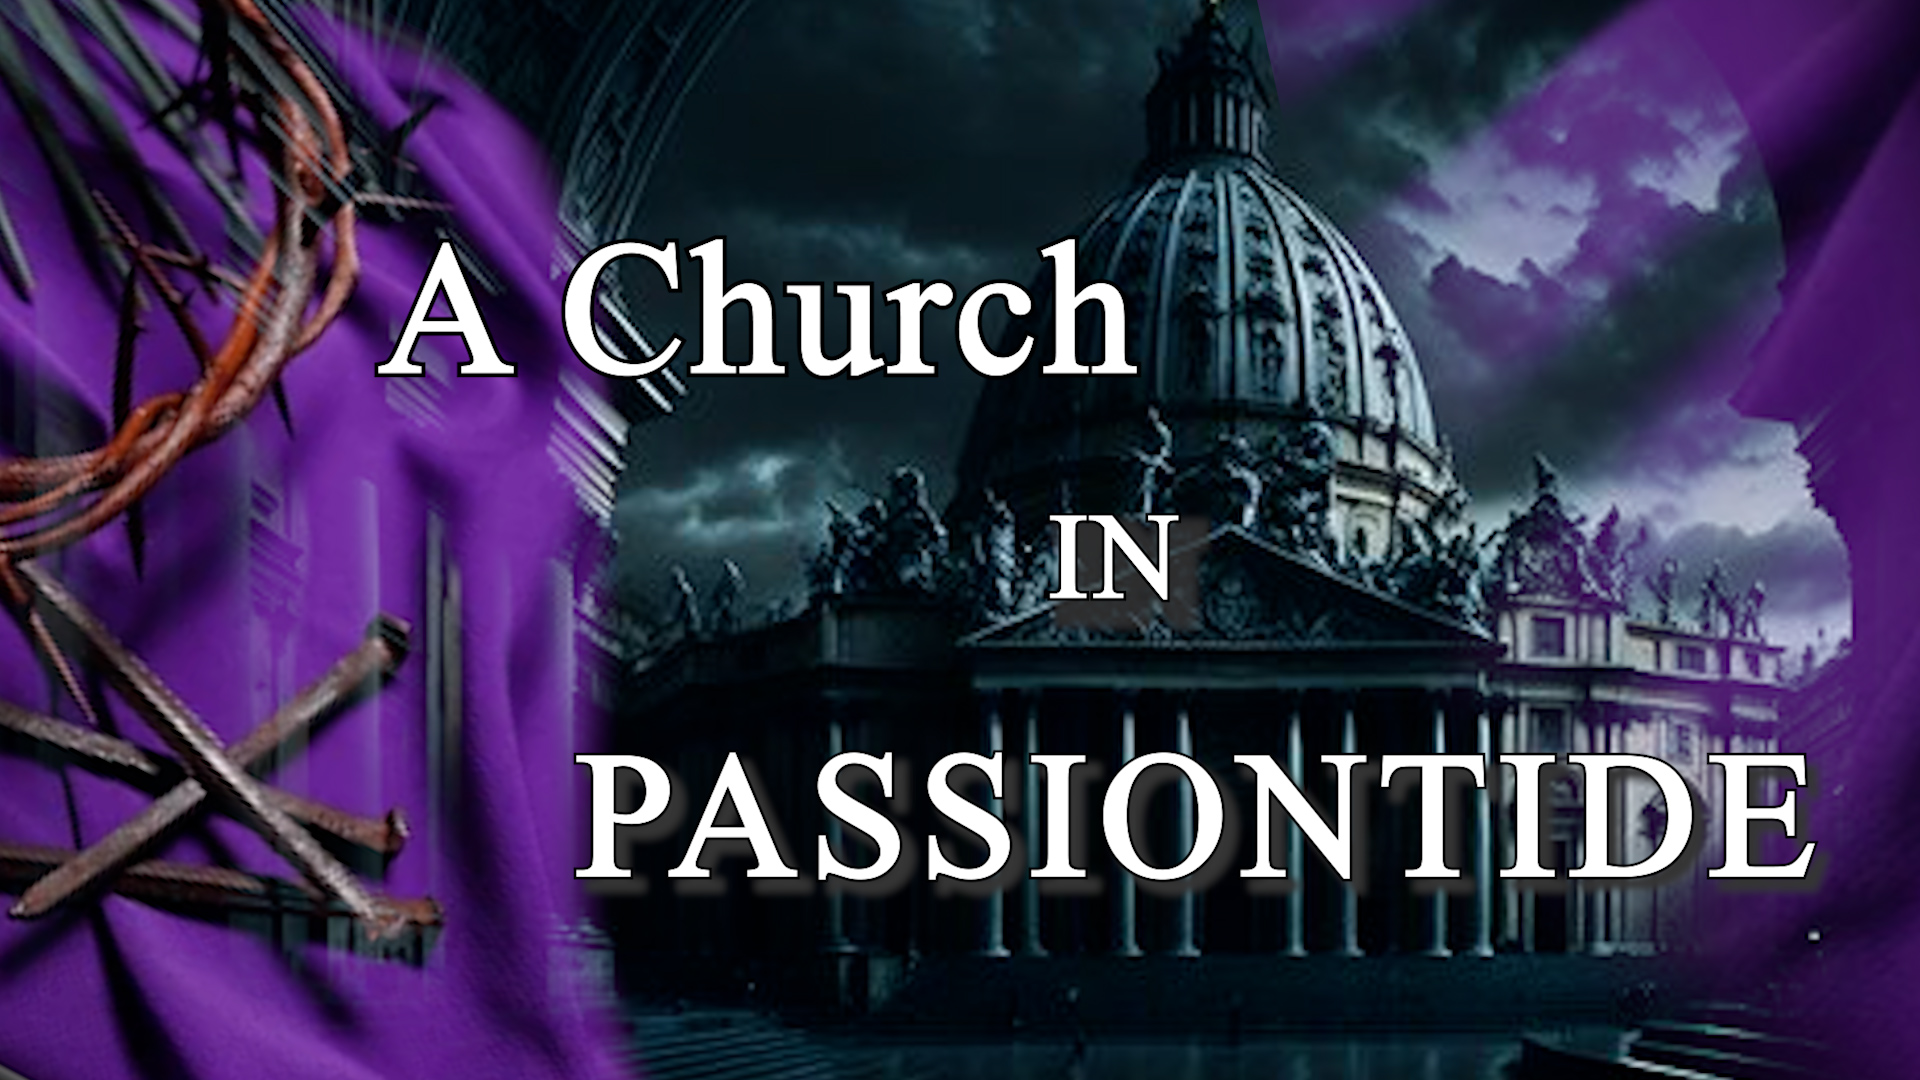 PASSIONTIDE: The Crucifixion of the Catholic Church